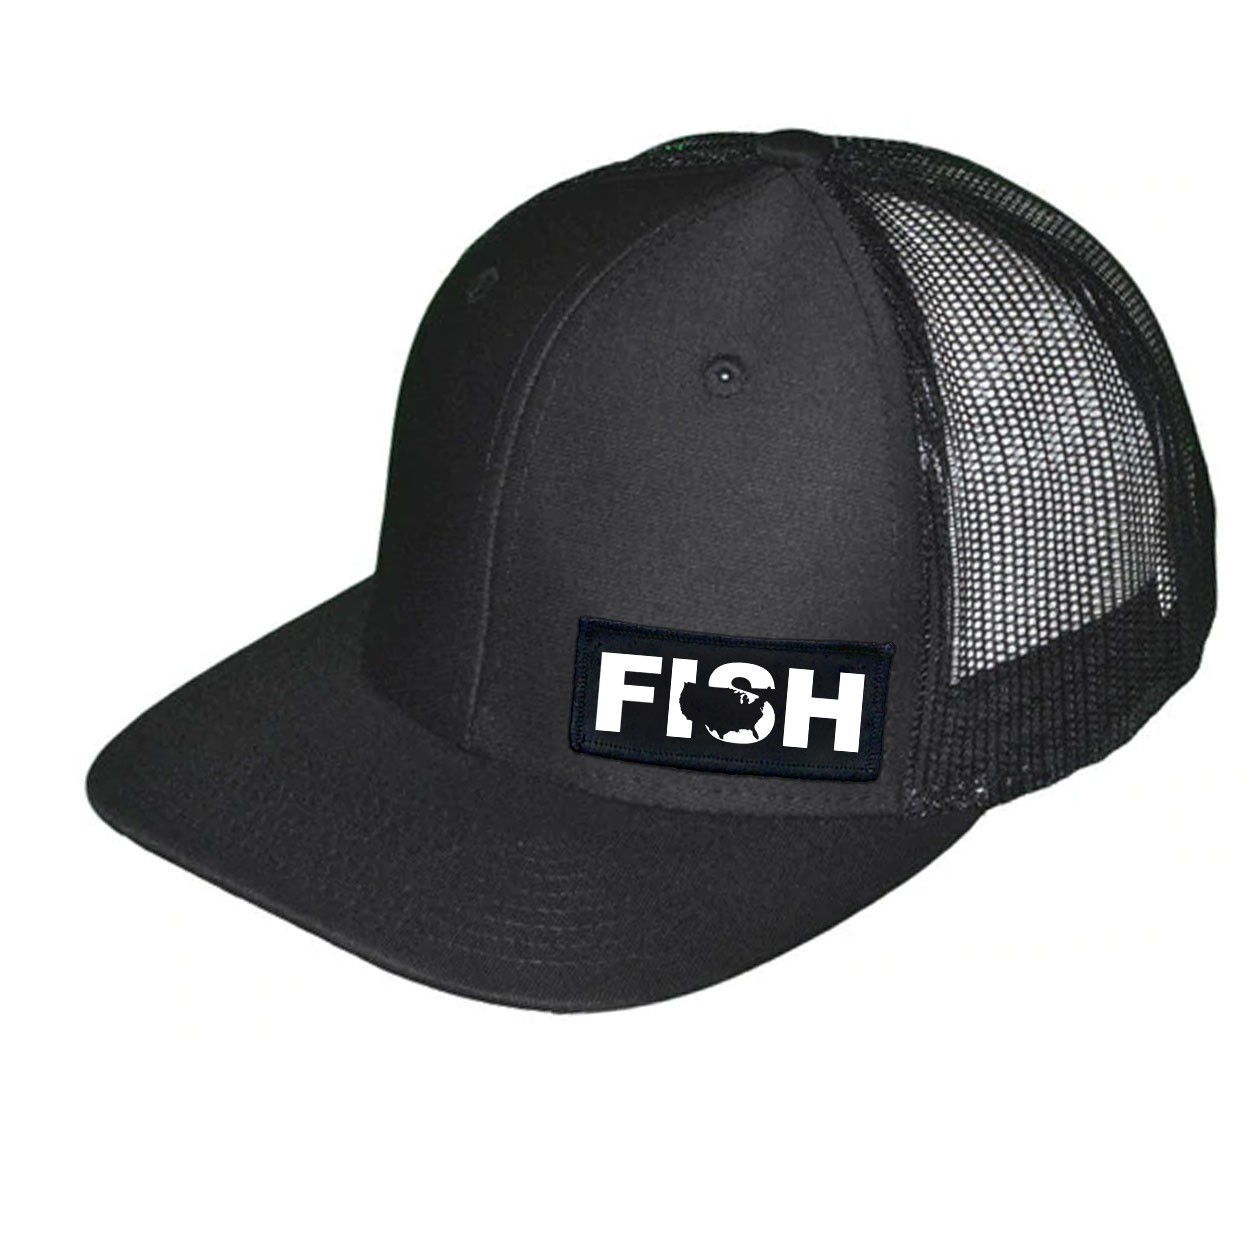 Fish United States Night Out Woven Patch Snapback Trucker Hat Black (White Logo)